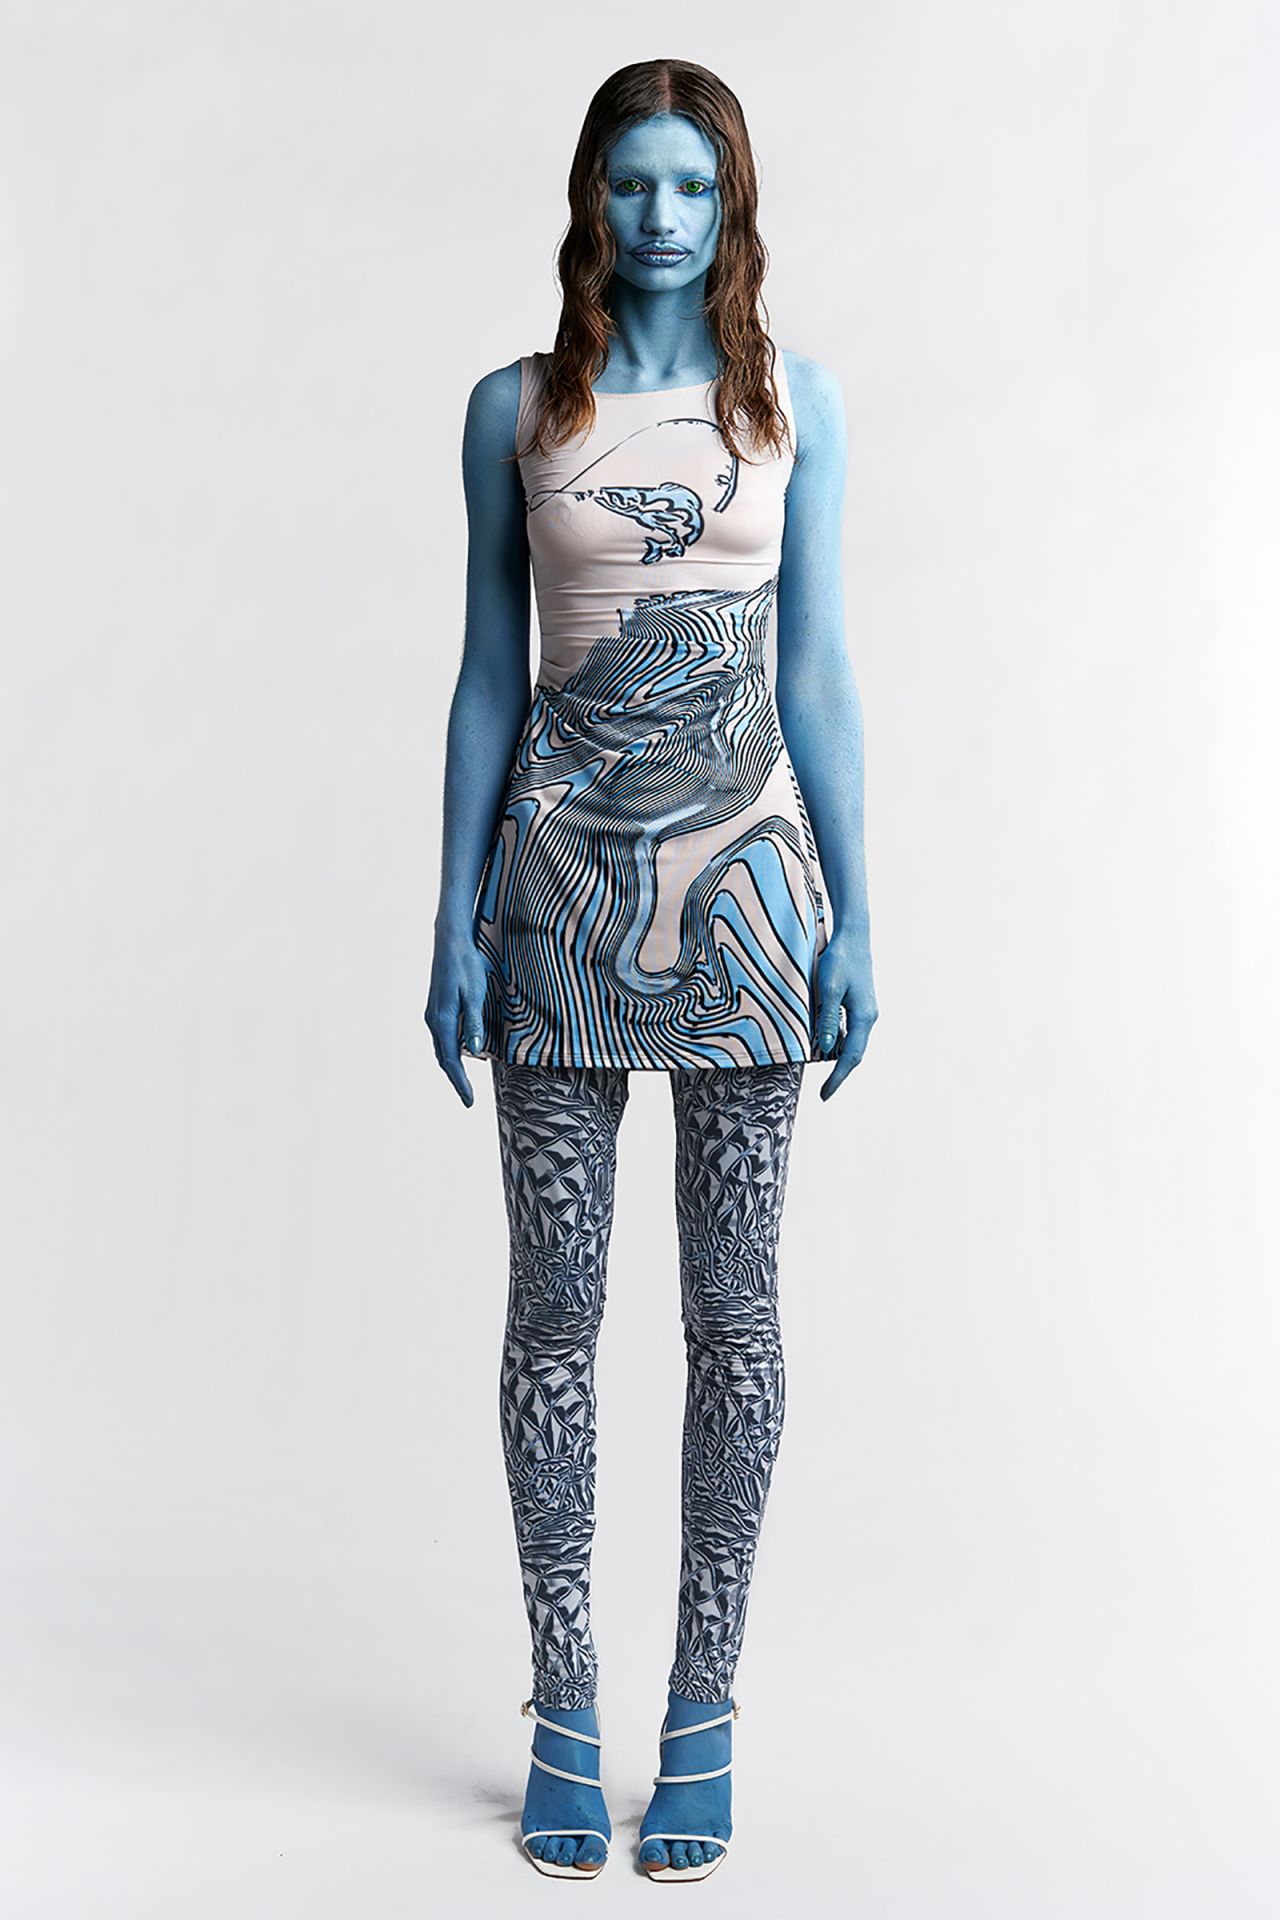 Schloss often employs bold, digitally designed prints and favors catsuit silhouettes.